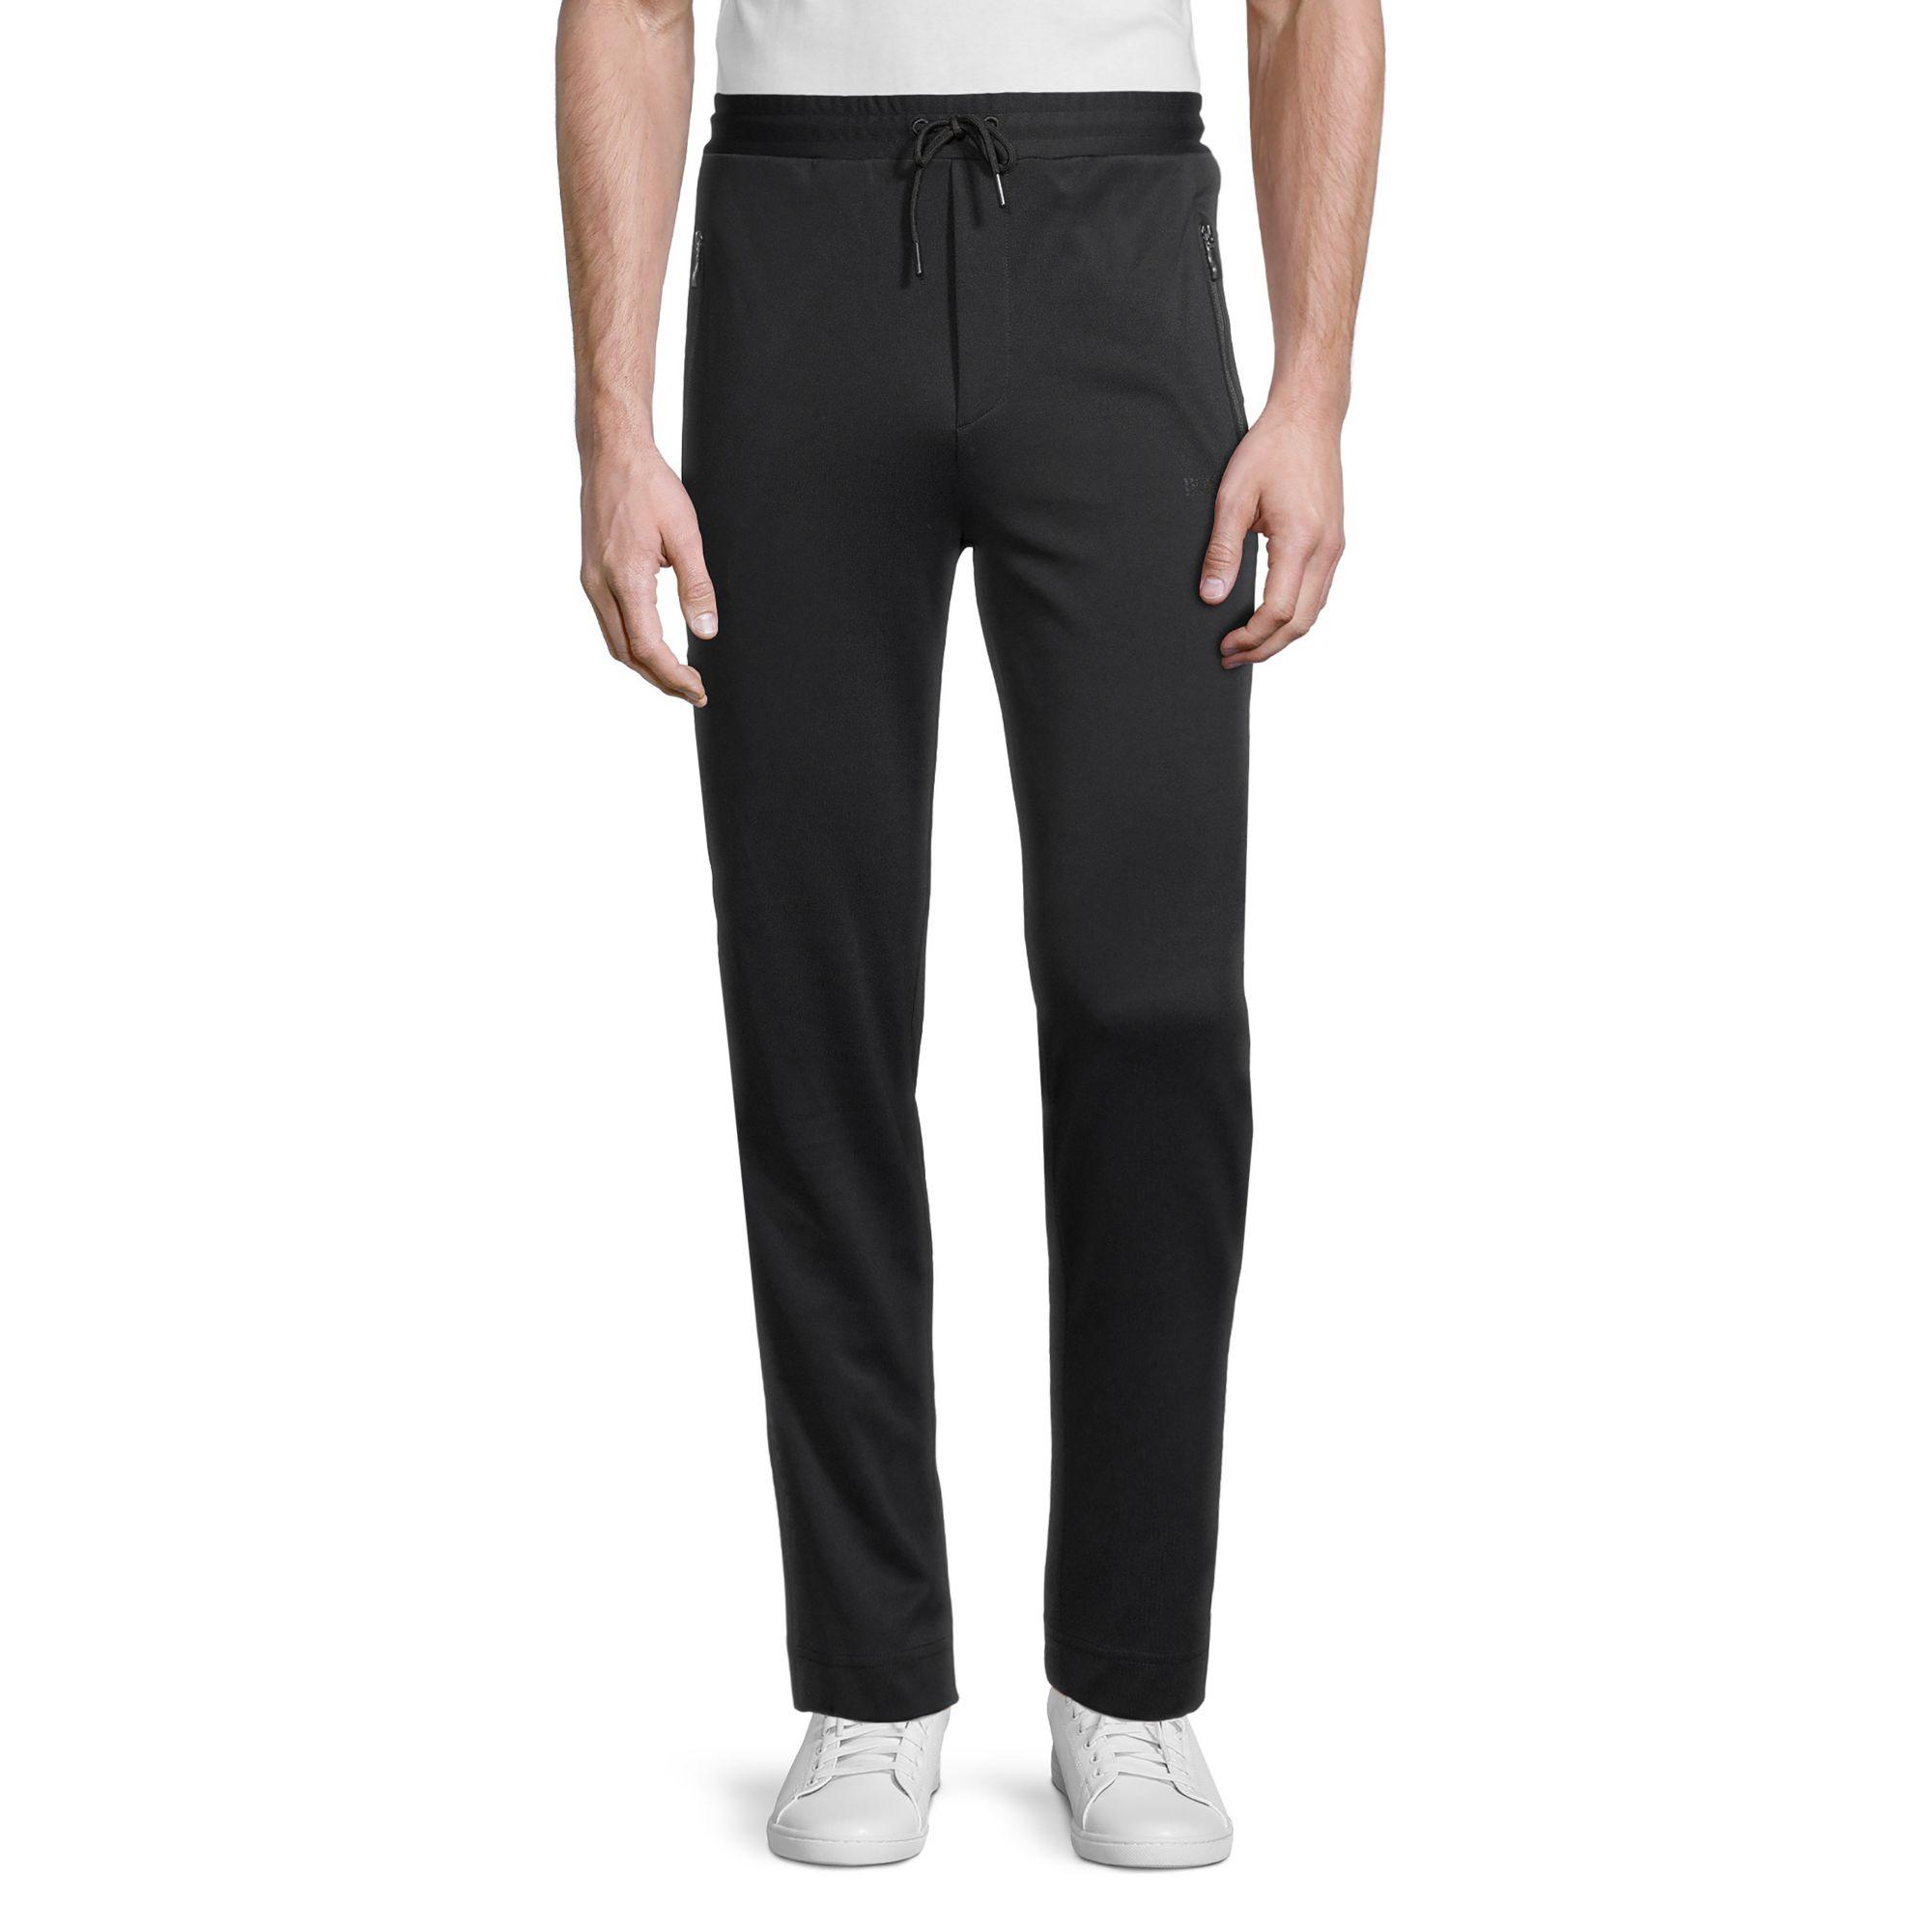 BOSS by Hugo Boss Synthetic Hurley Track Pants in Black for Men - Lyst